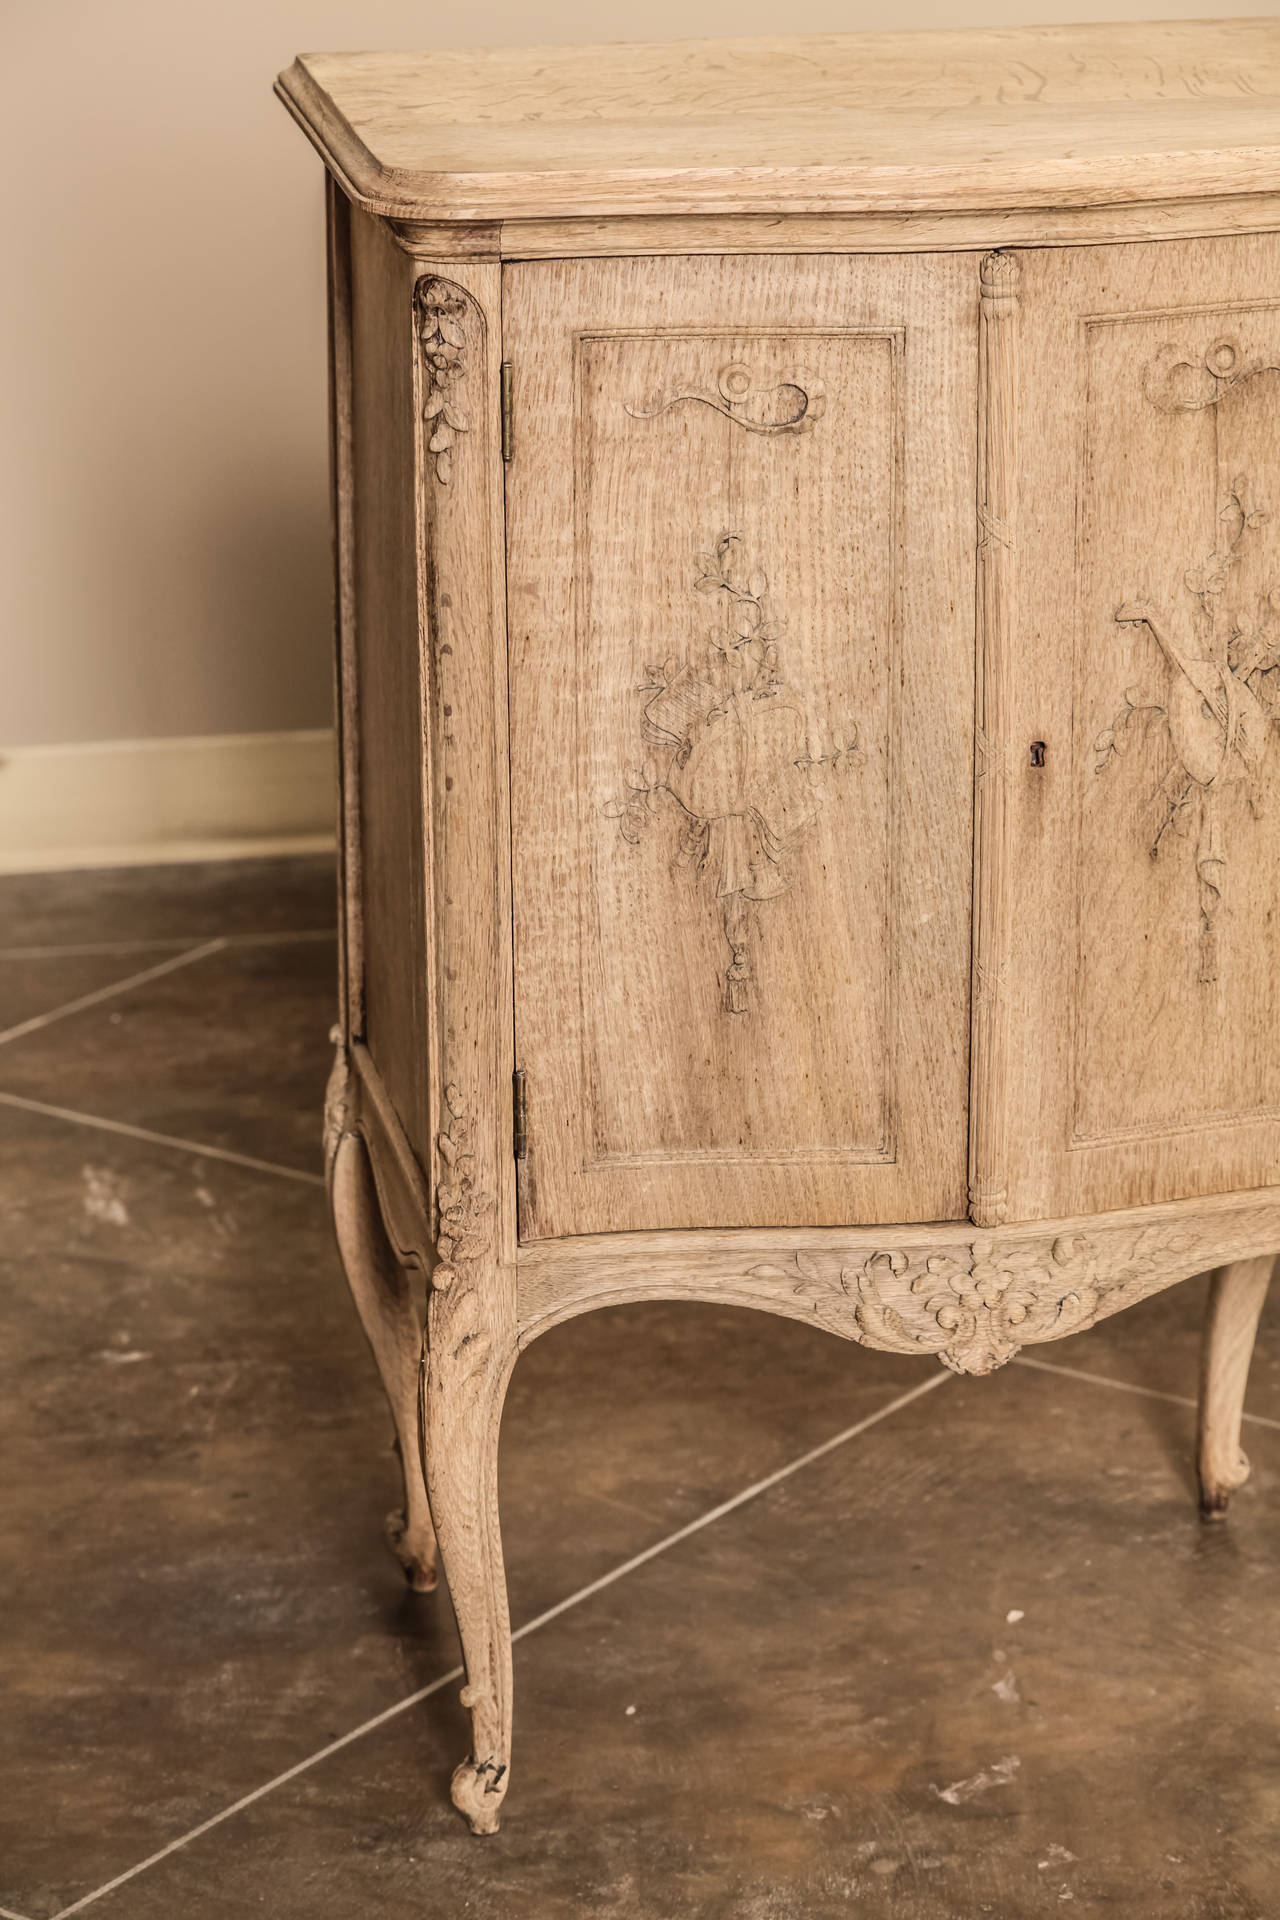 Carved French Neoclassical Transitional Stripped Confiturier (Cabinet) in Oak